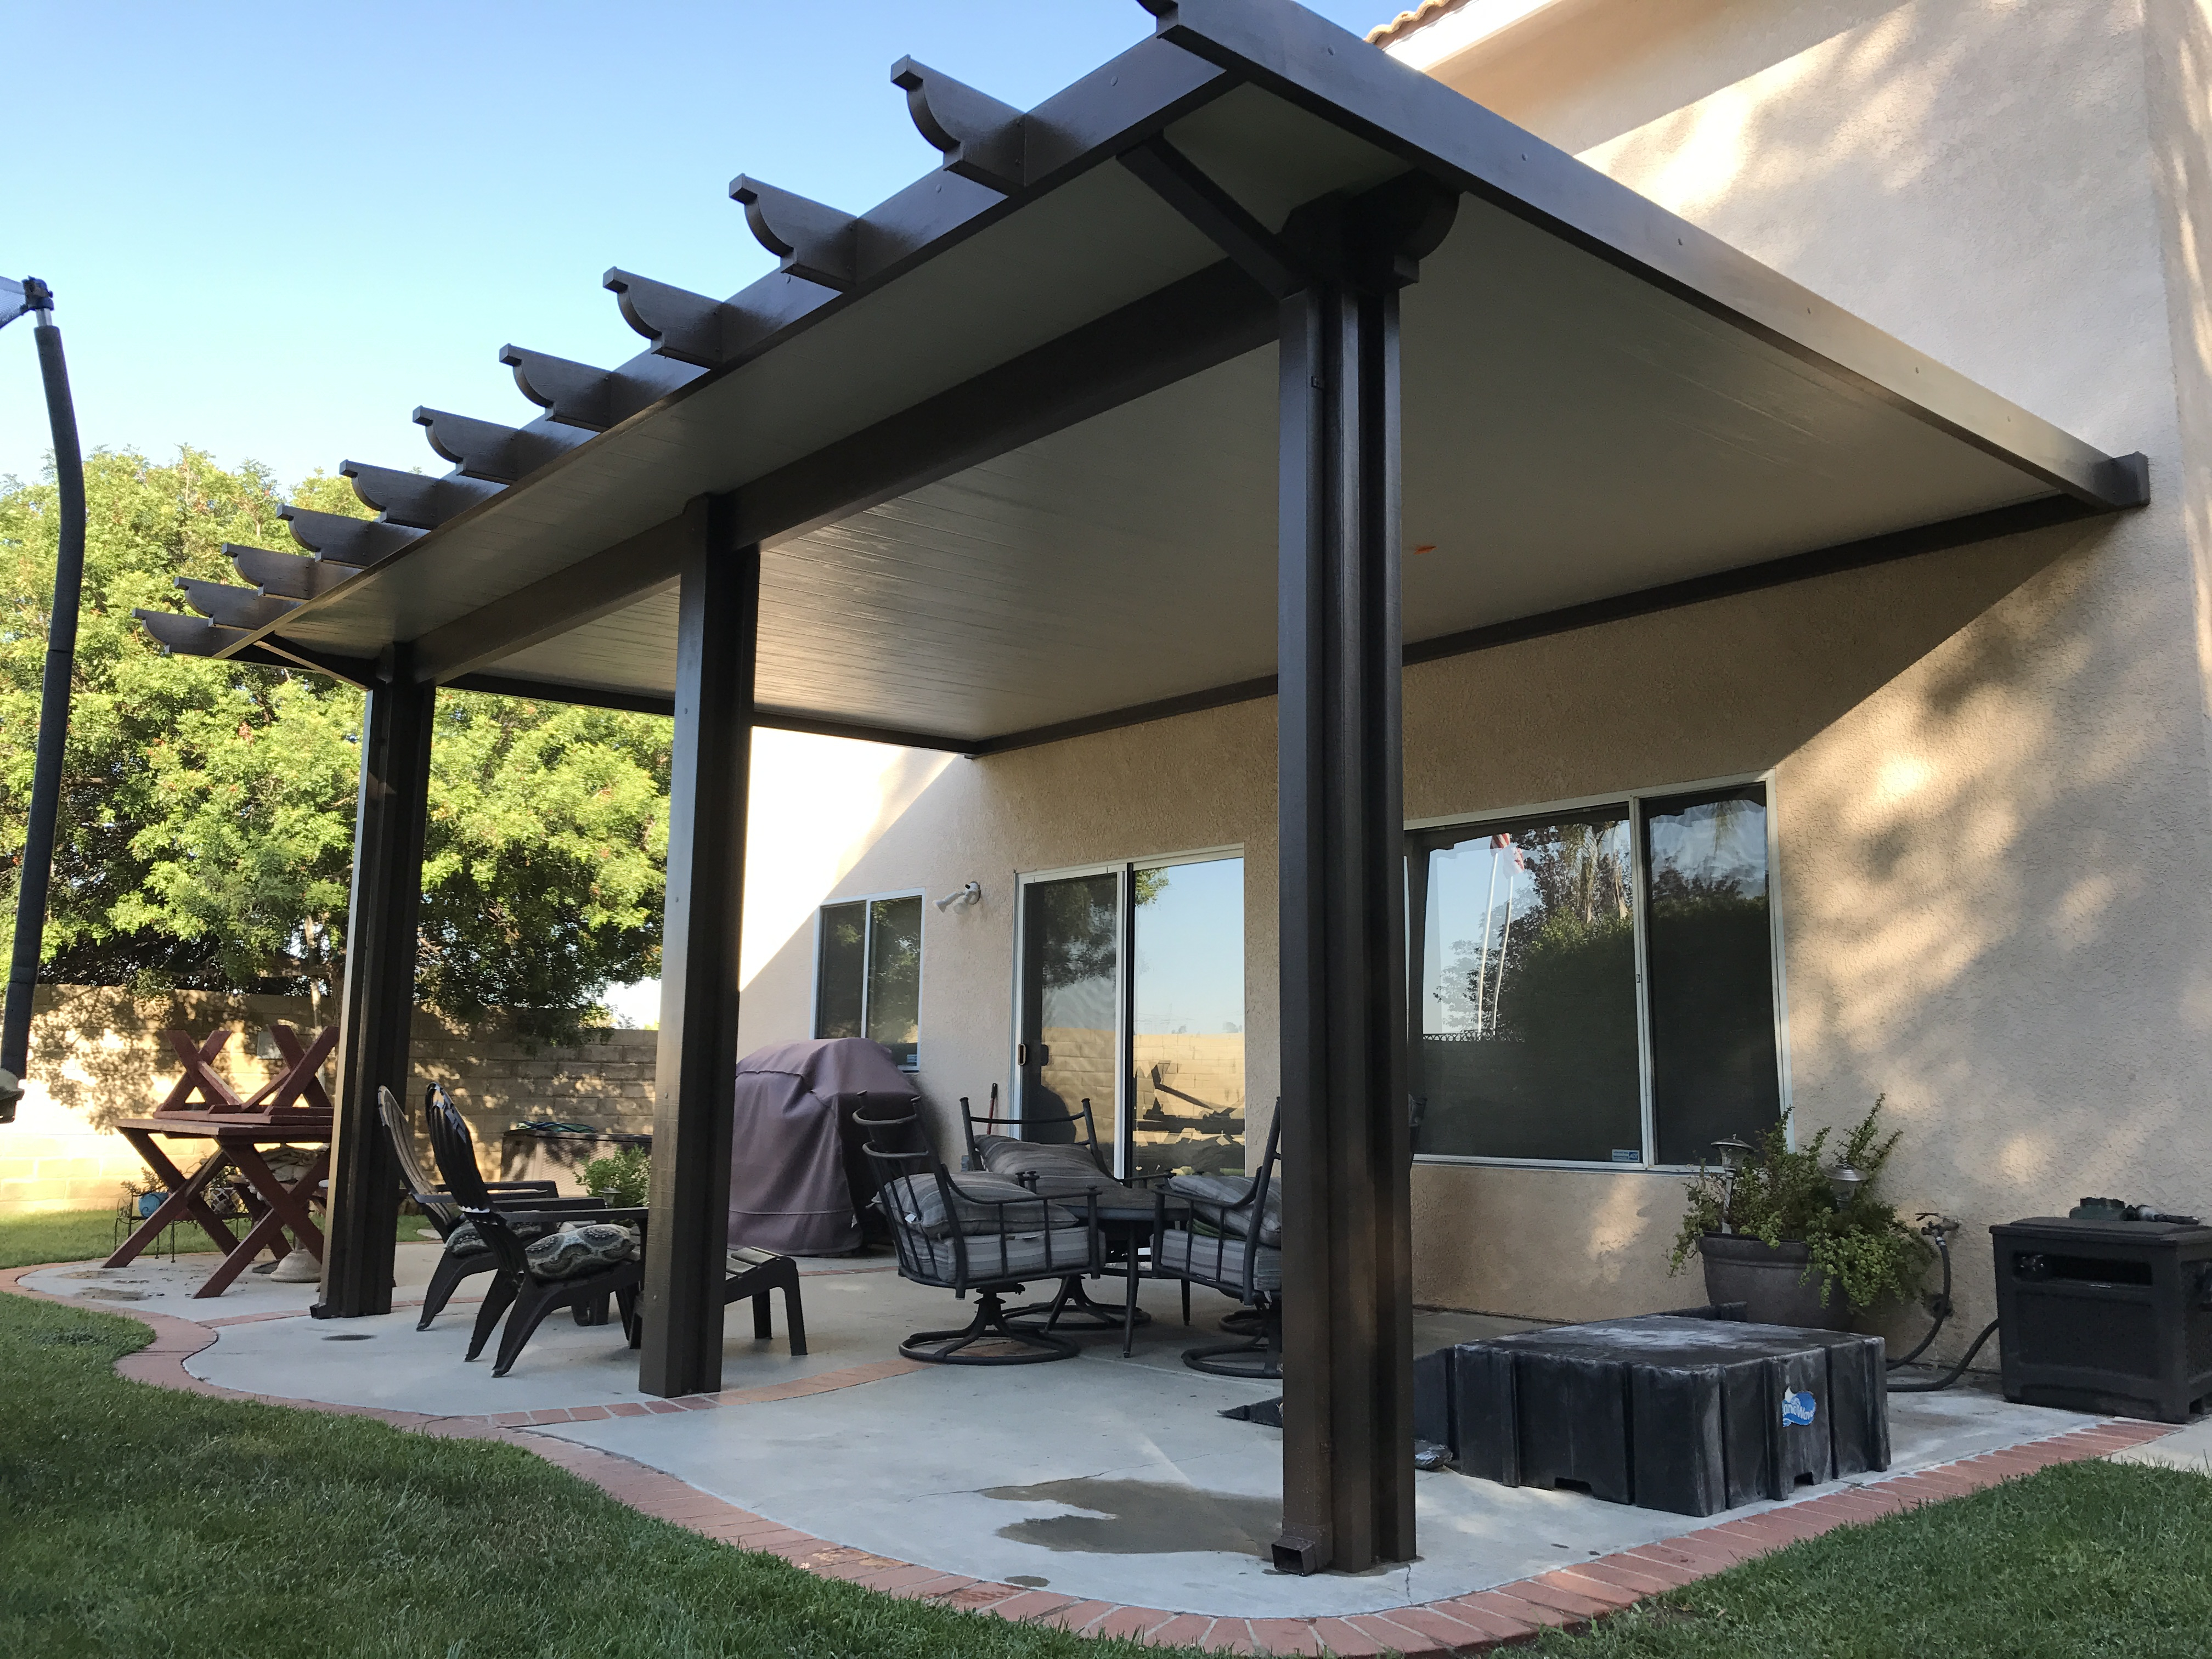 Alumawood Insulated Roofed Patio Cover Patiocovered regarding measurements 4032 X 3024